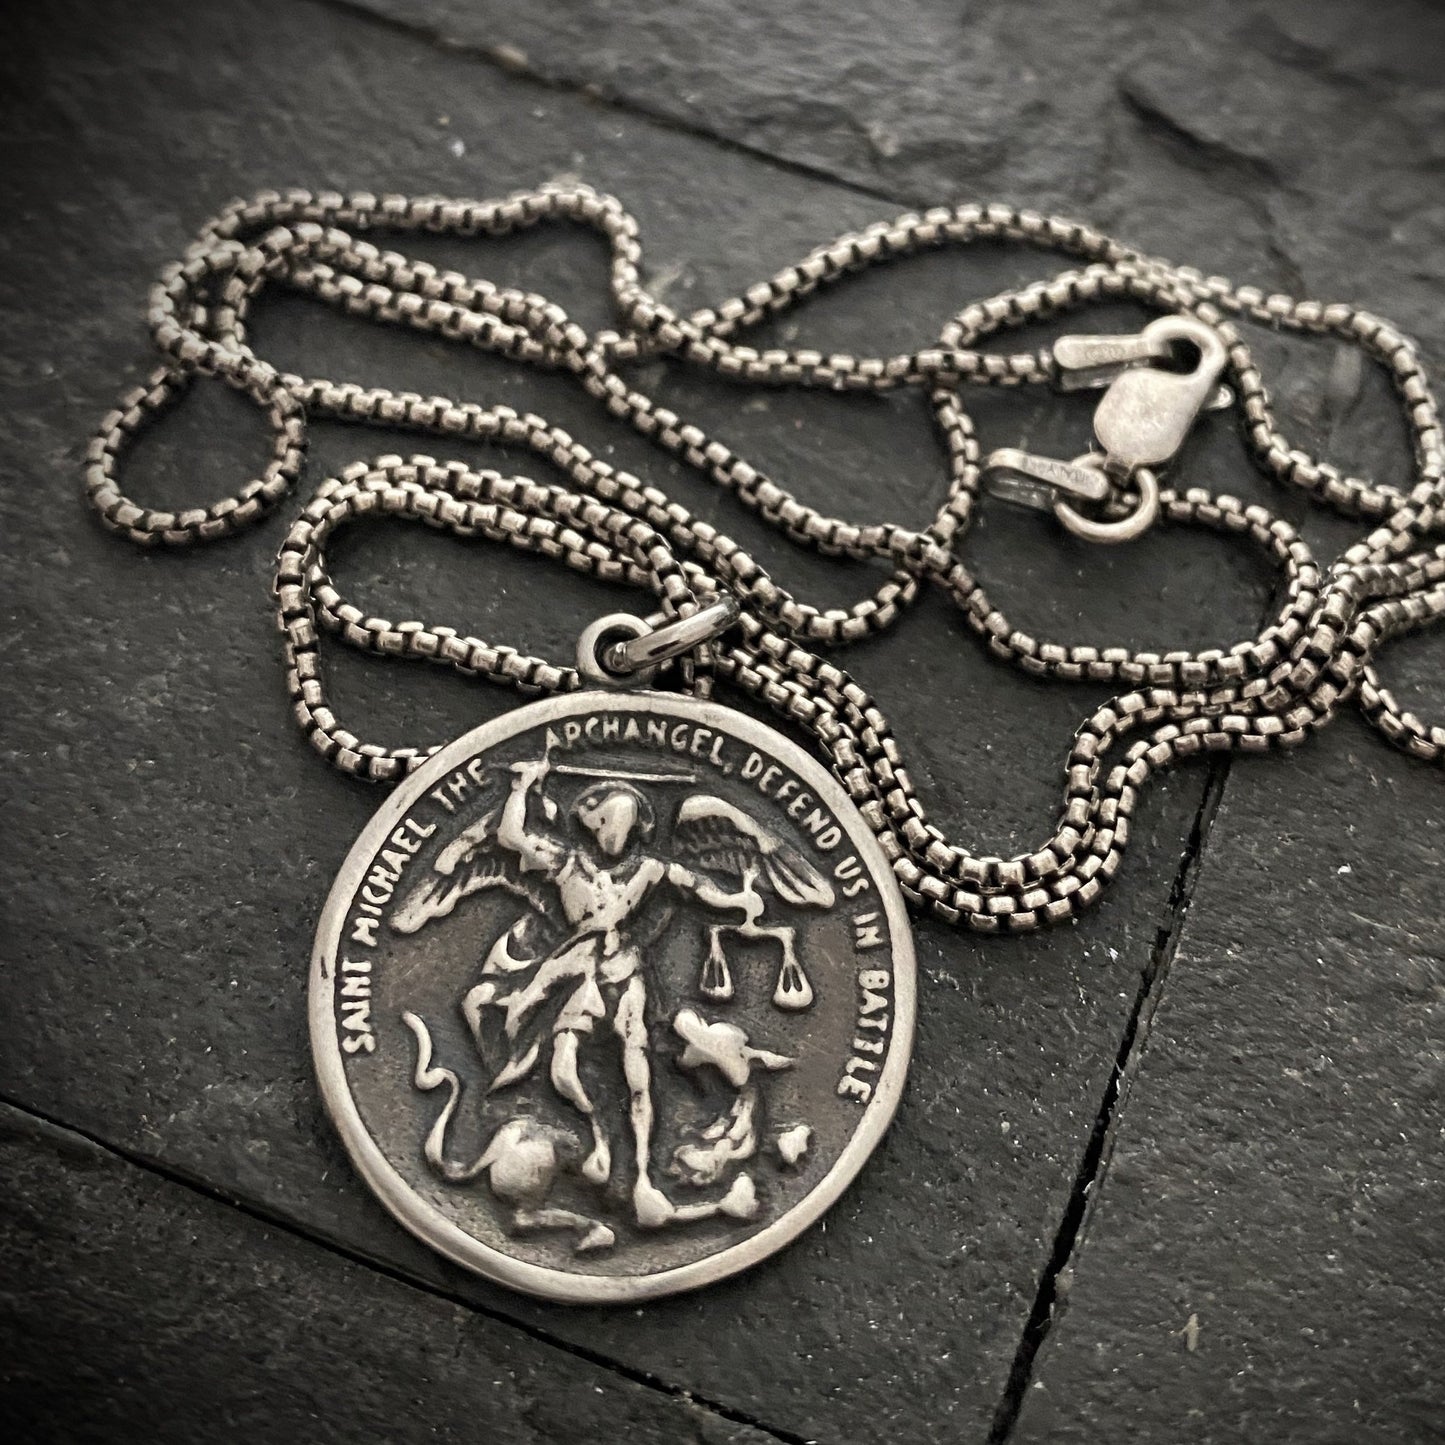 Men's Sterling Silver Archangel St. Michael Necklace, Oxidized Silver Unisex Jewelry, 20 or 24 Inch Chain, SS-014